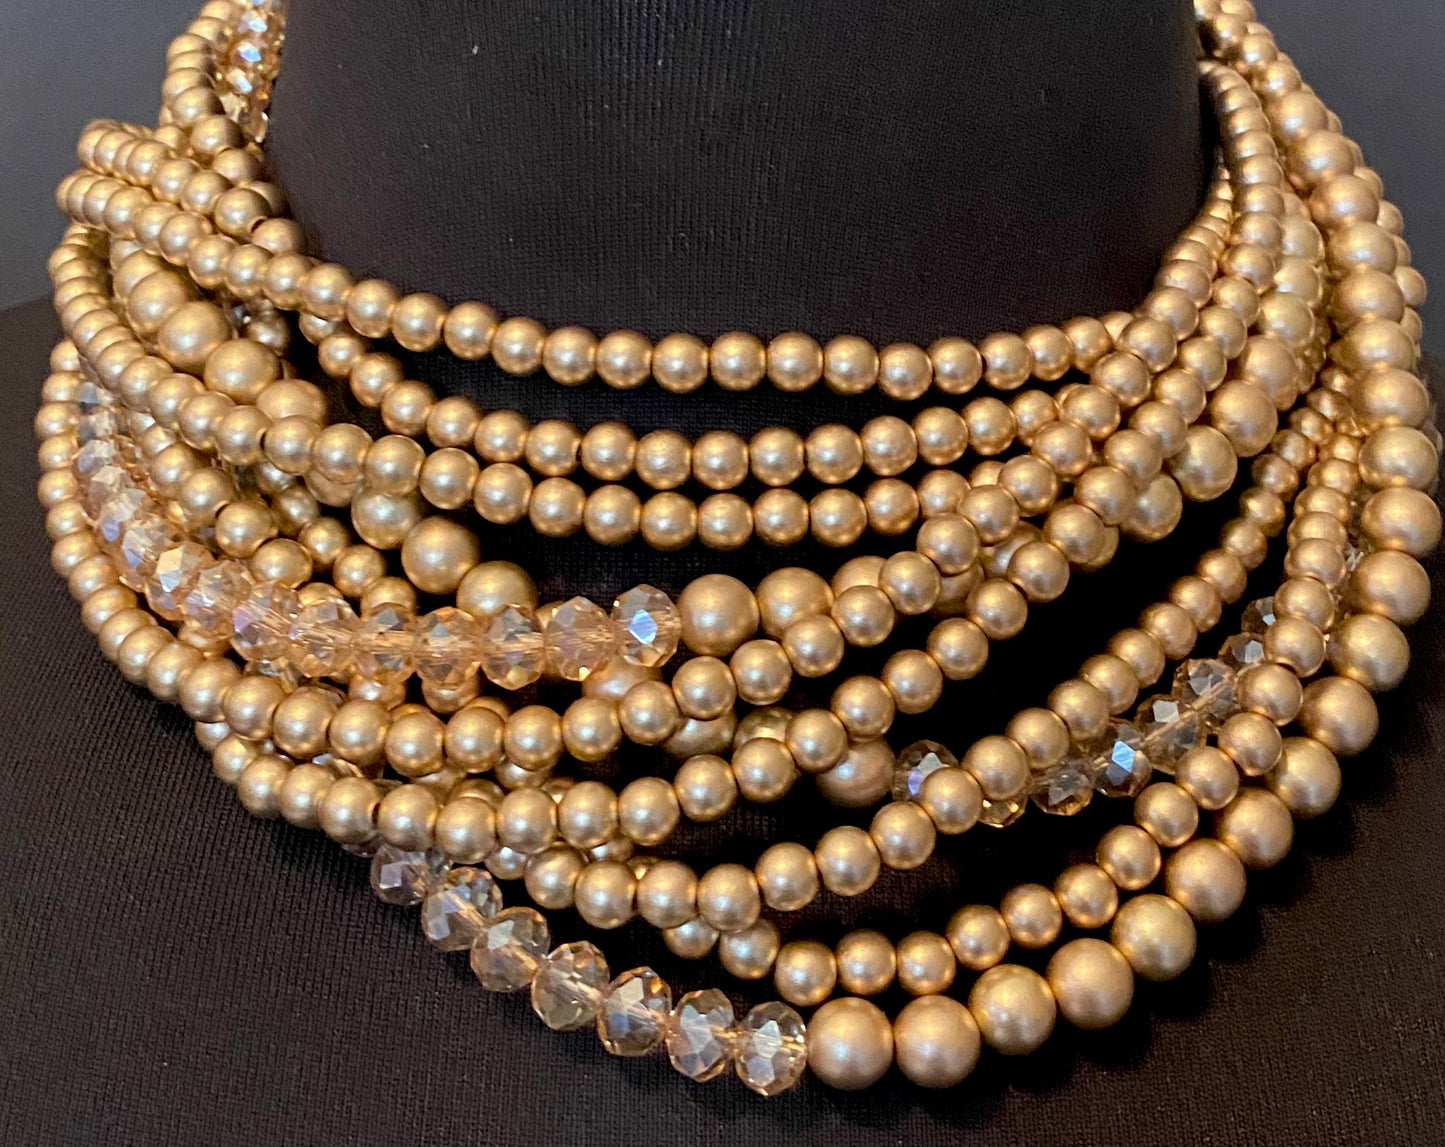 Multi-Strand Collar Necklace w/Crystal and Metallic Matte Beads